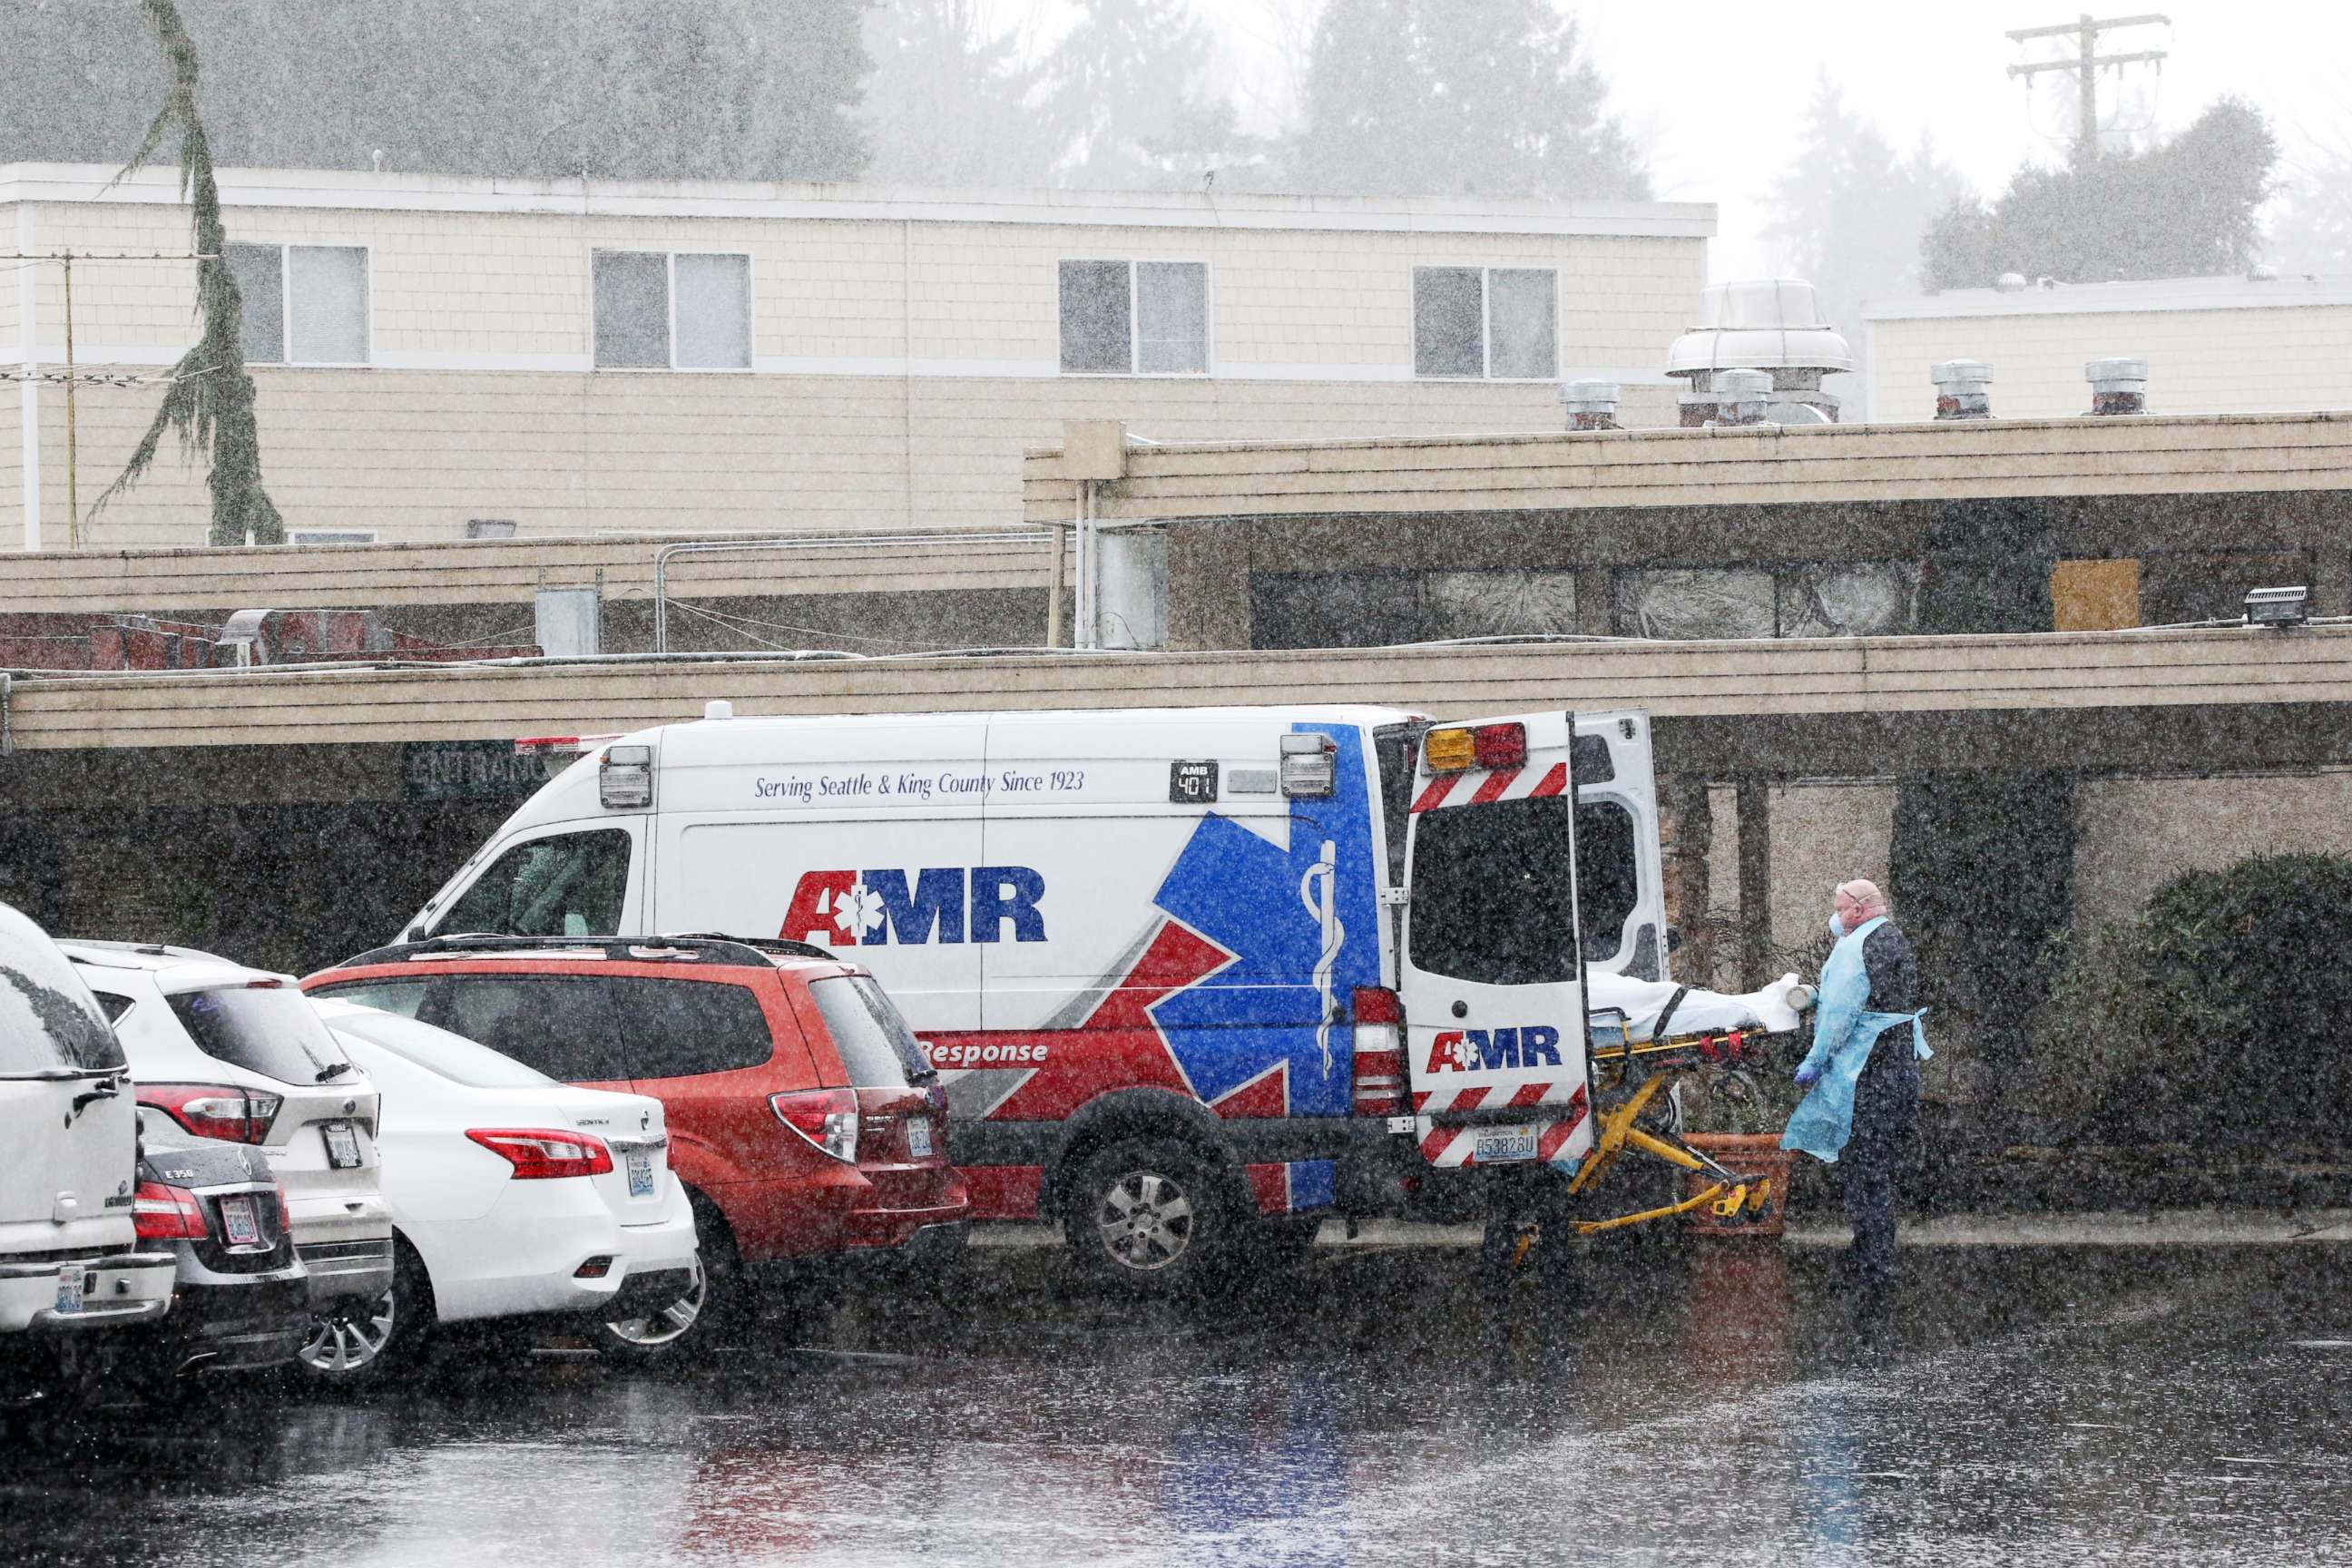 PHOTO: A patient is put into an ambulance during the pouring rain outside the Life Care Center of Kirkland in Kirkland, Wash., March 7, 2020.